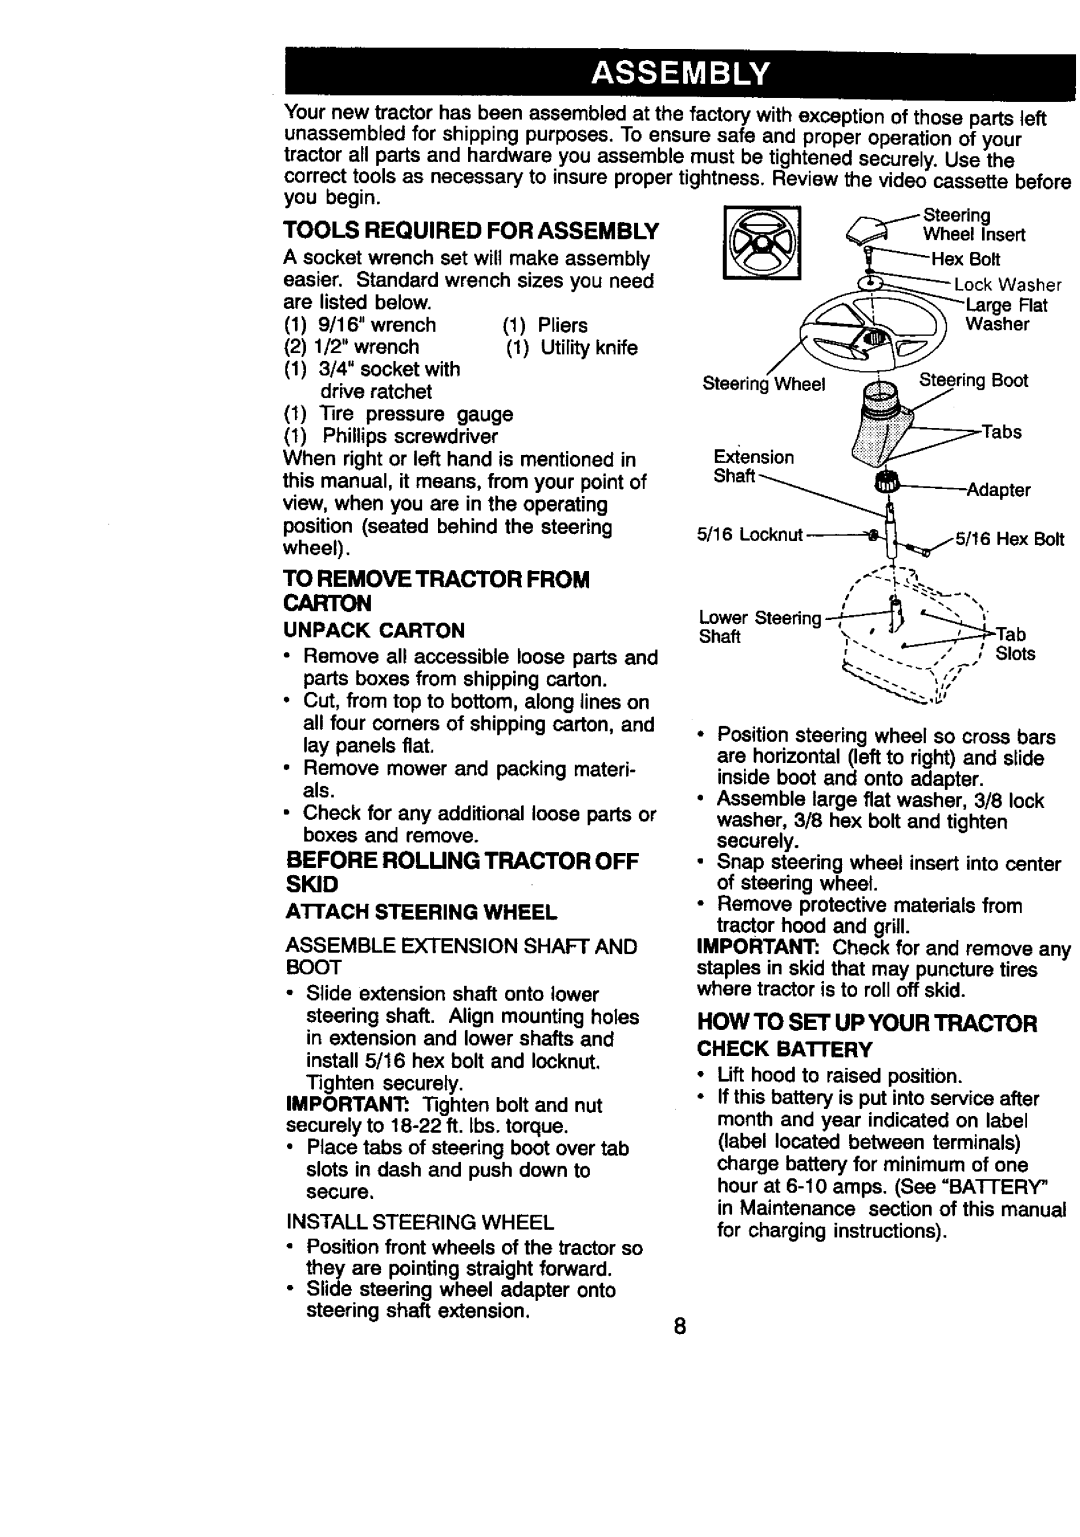 Craftsman 917.27086 manual To Removetractor From Carton 